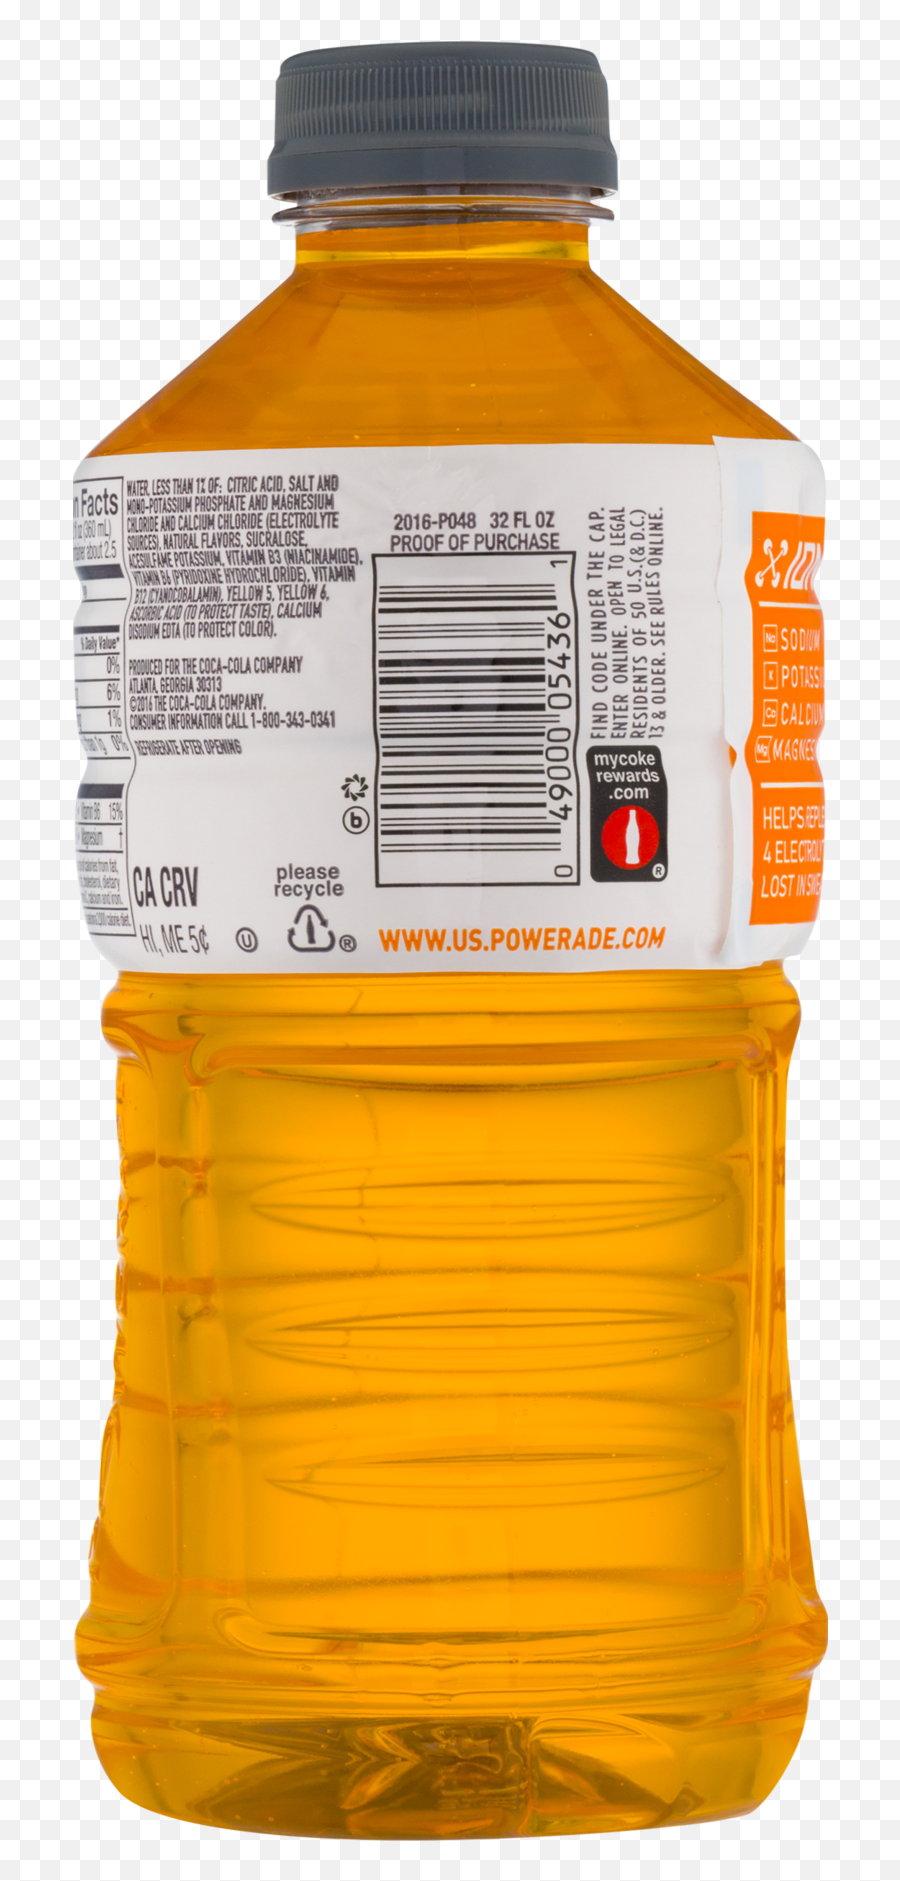 Powerade Label Nutrition Facts - Best Label Ideas 2019 Squash Png,Powerade Logos